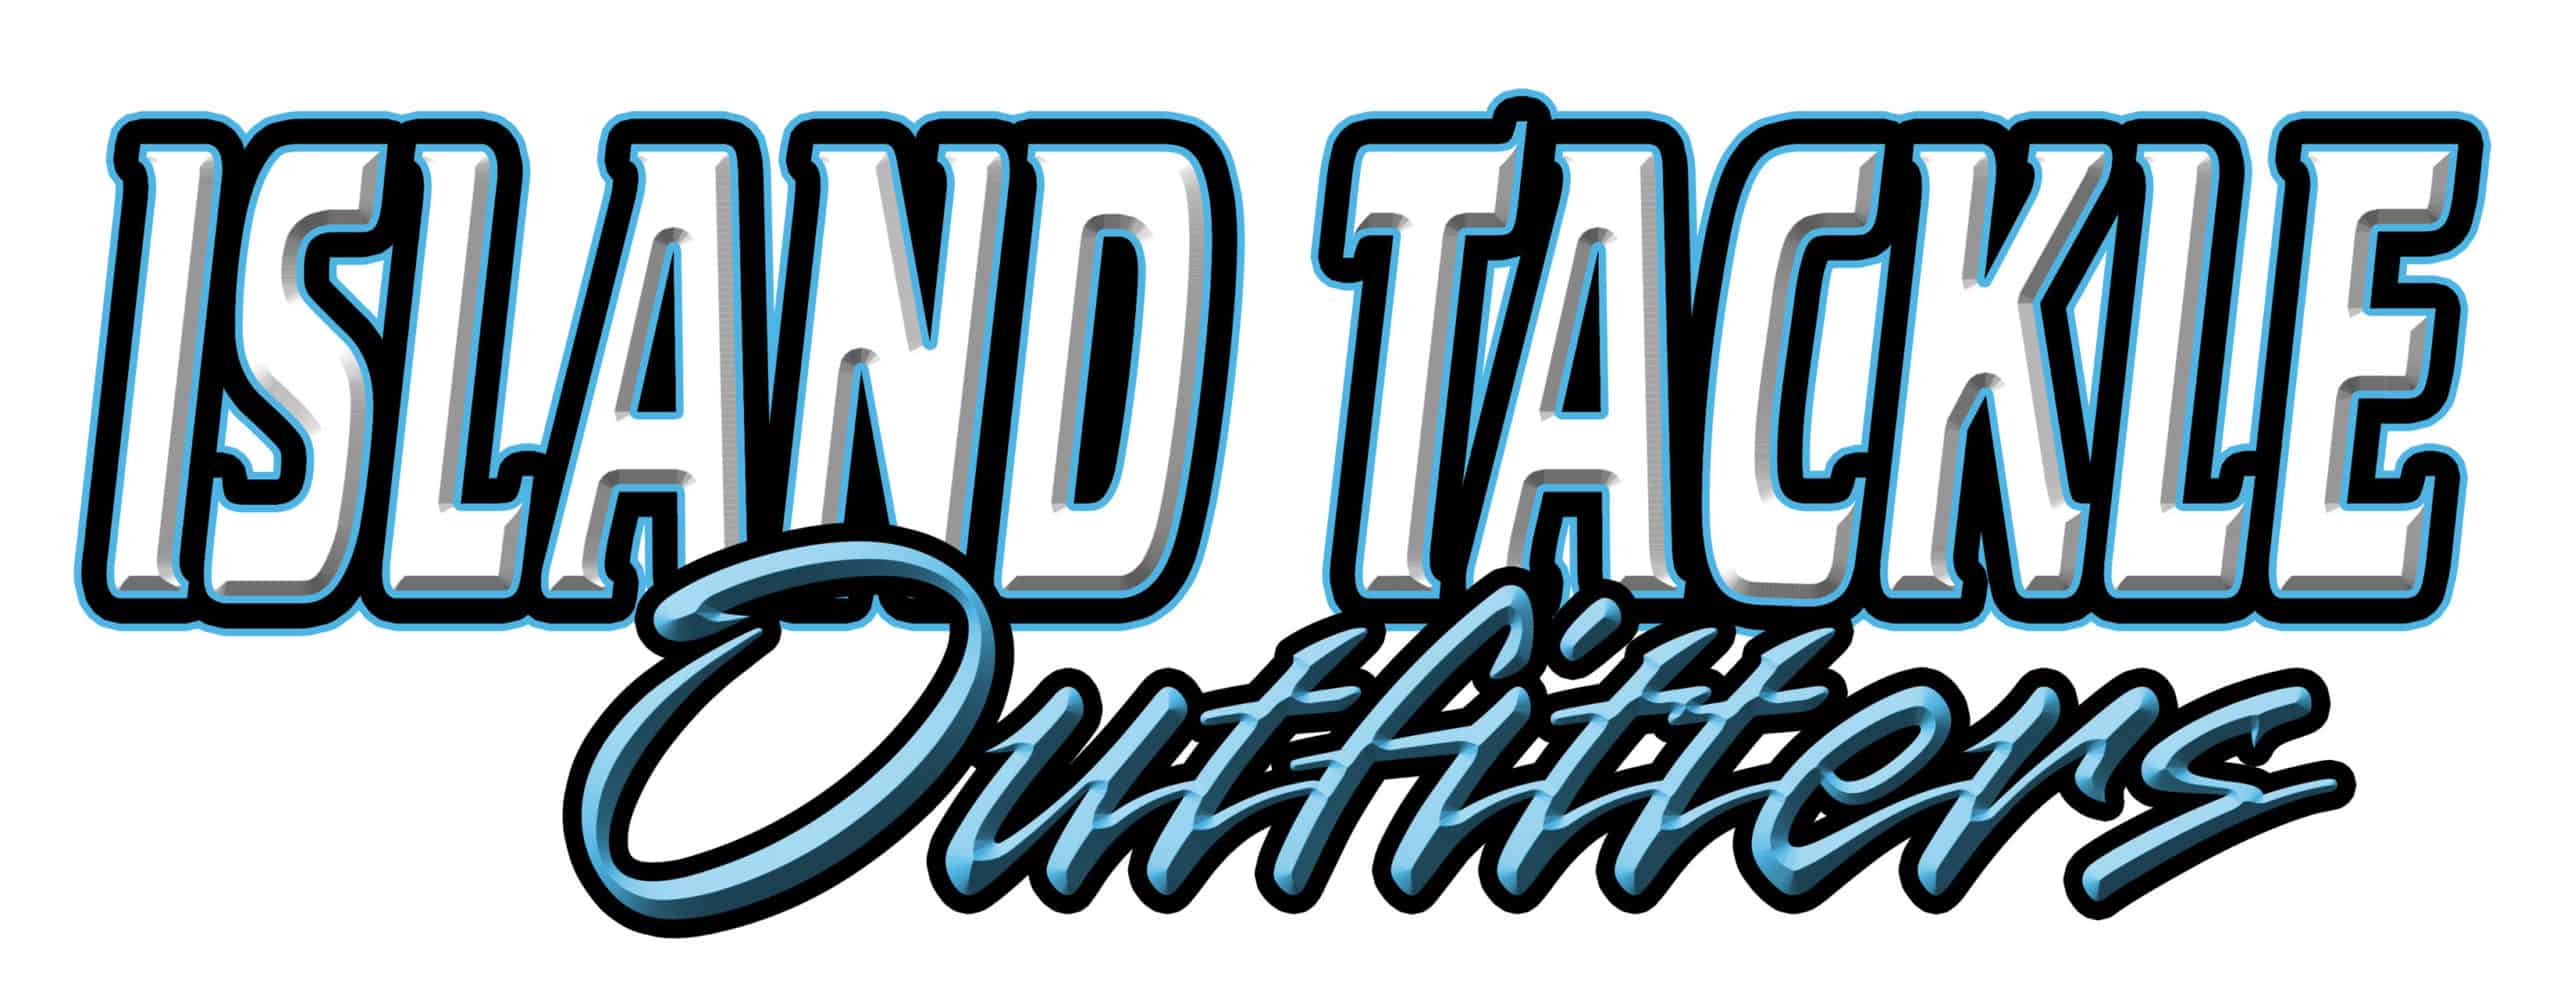 Island Tackle Outfitters